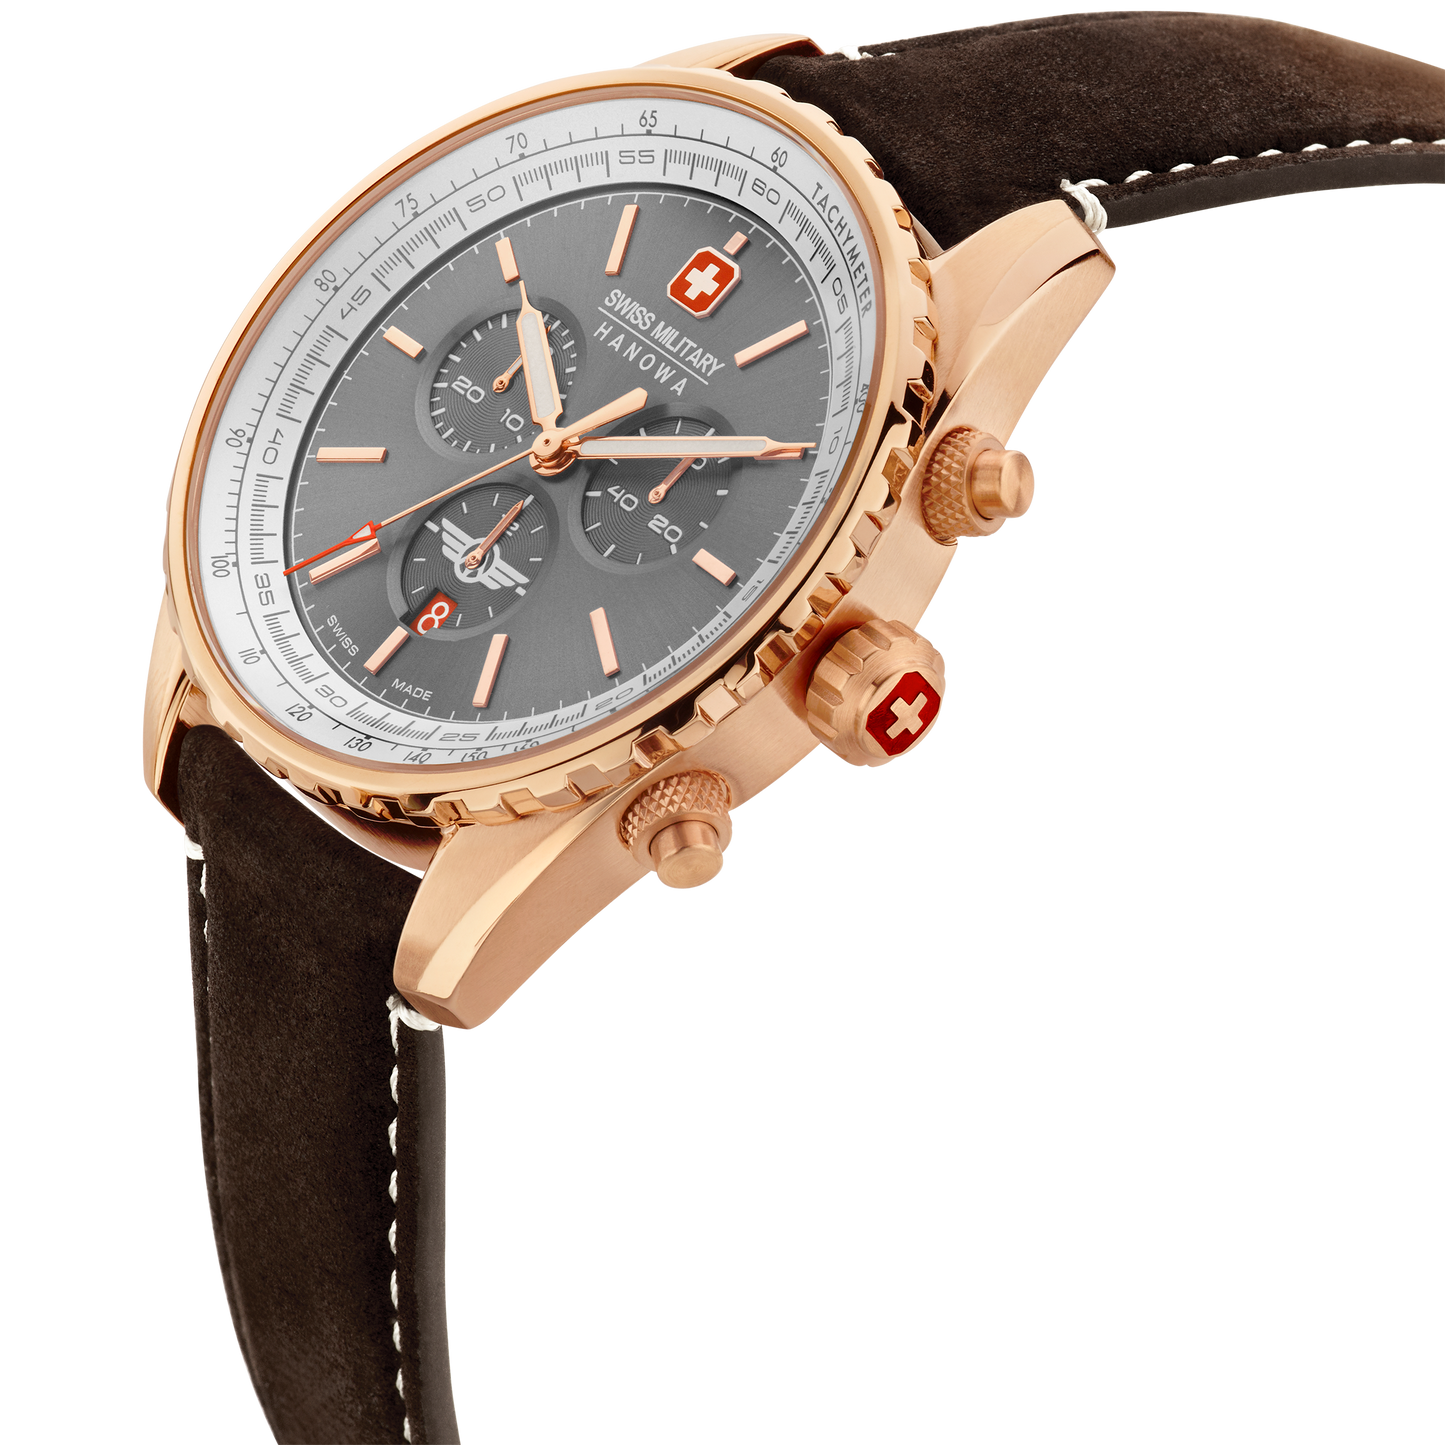 Swiss Military Hanowa Afterburn Chrono. Stainless steel case in rosegold PDV plating, light grey dial and a genuine dark brown Italian leather strap.